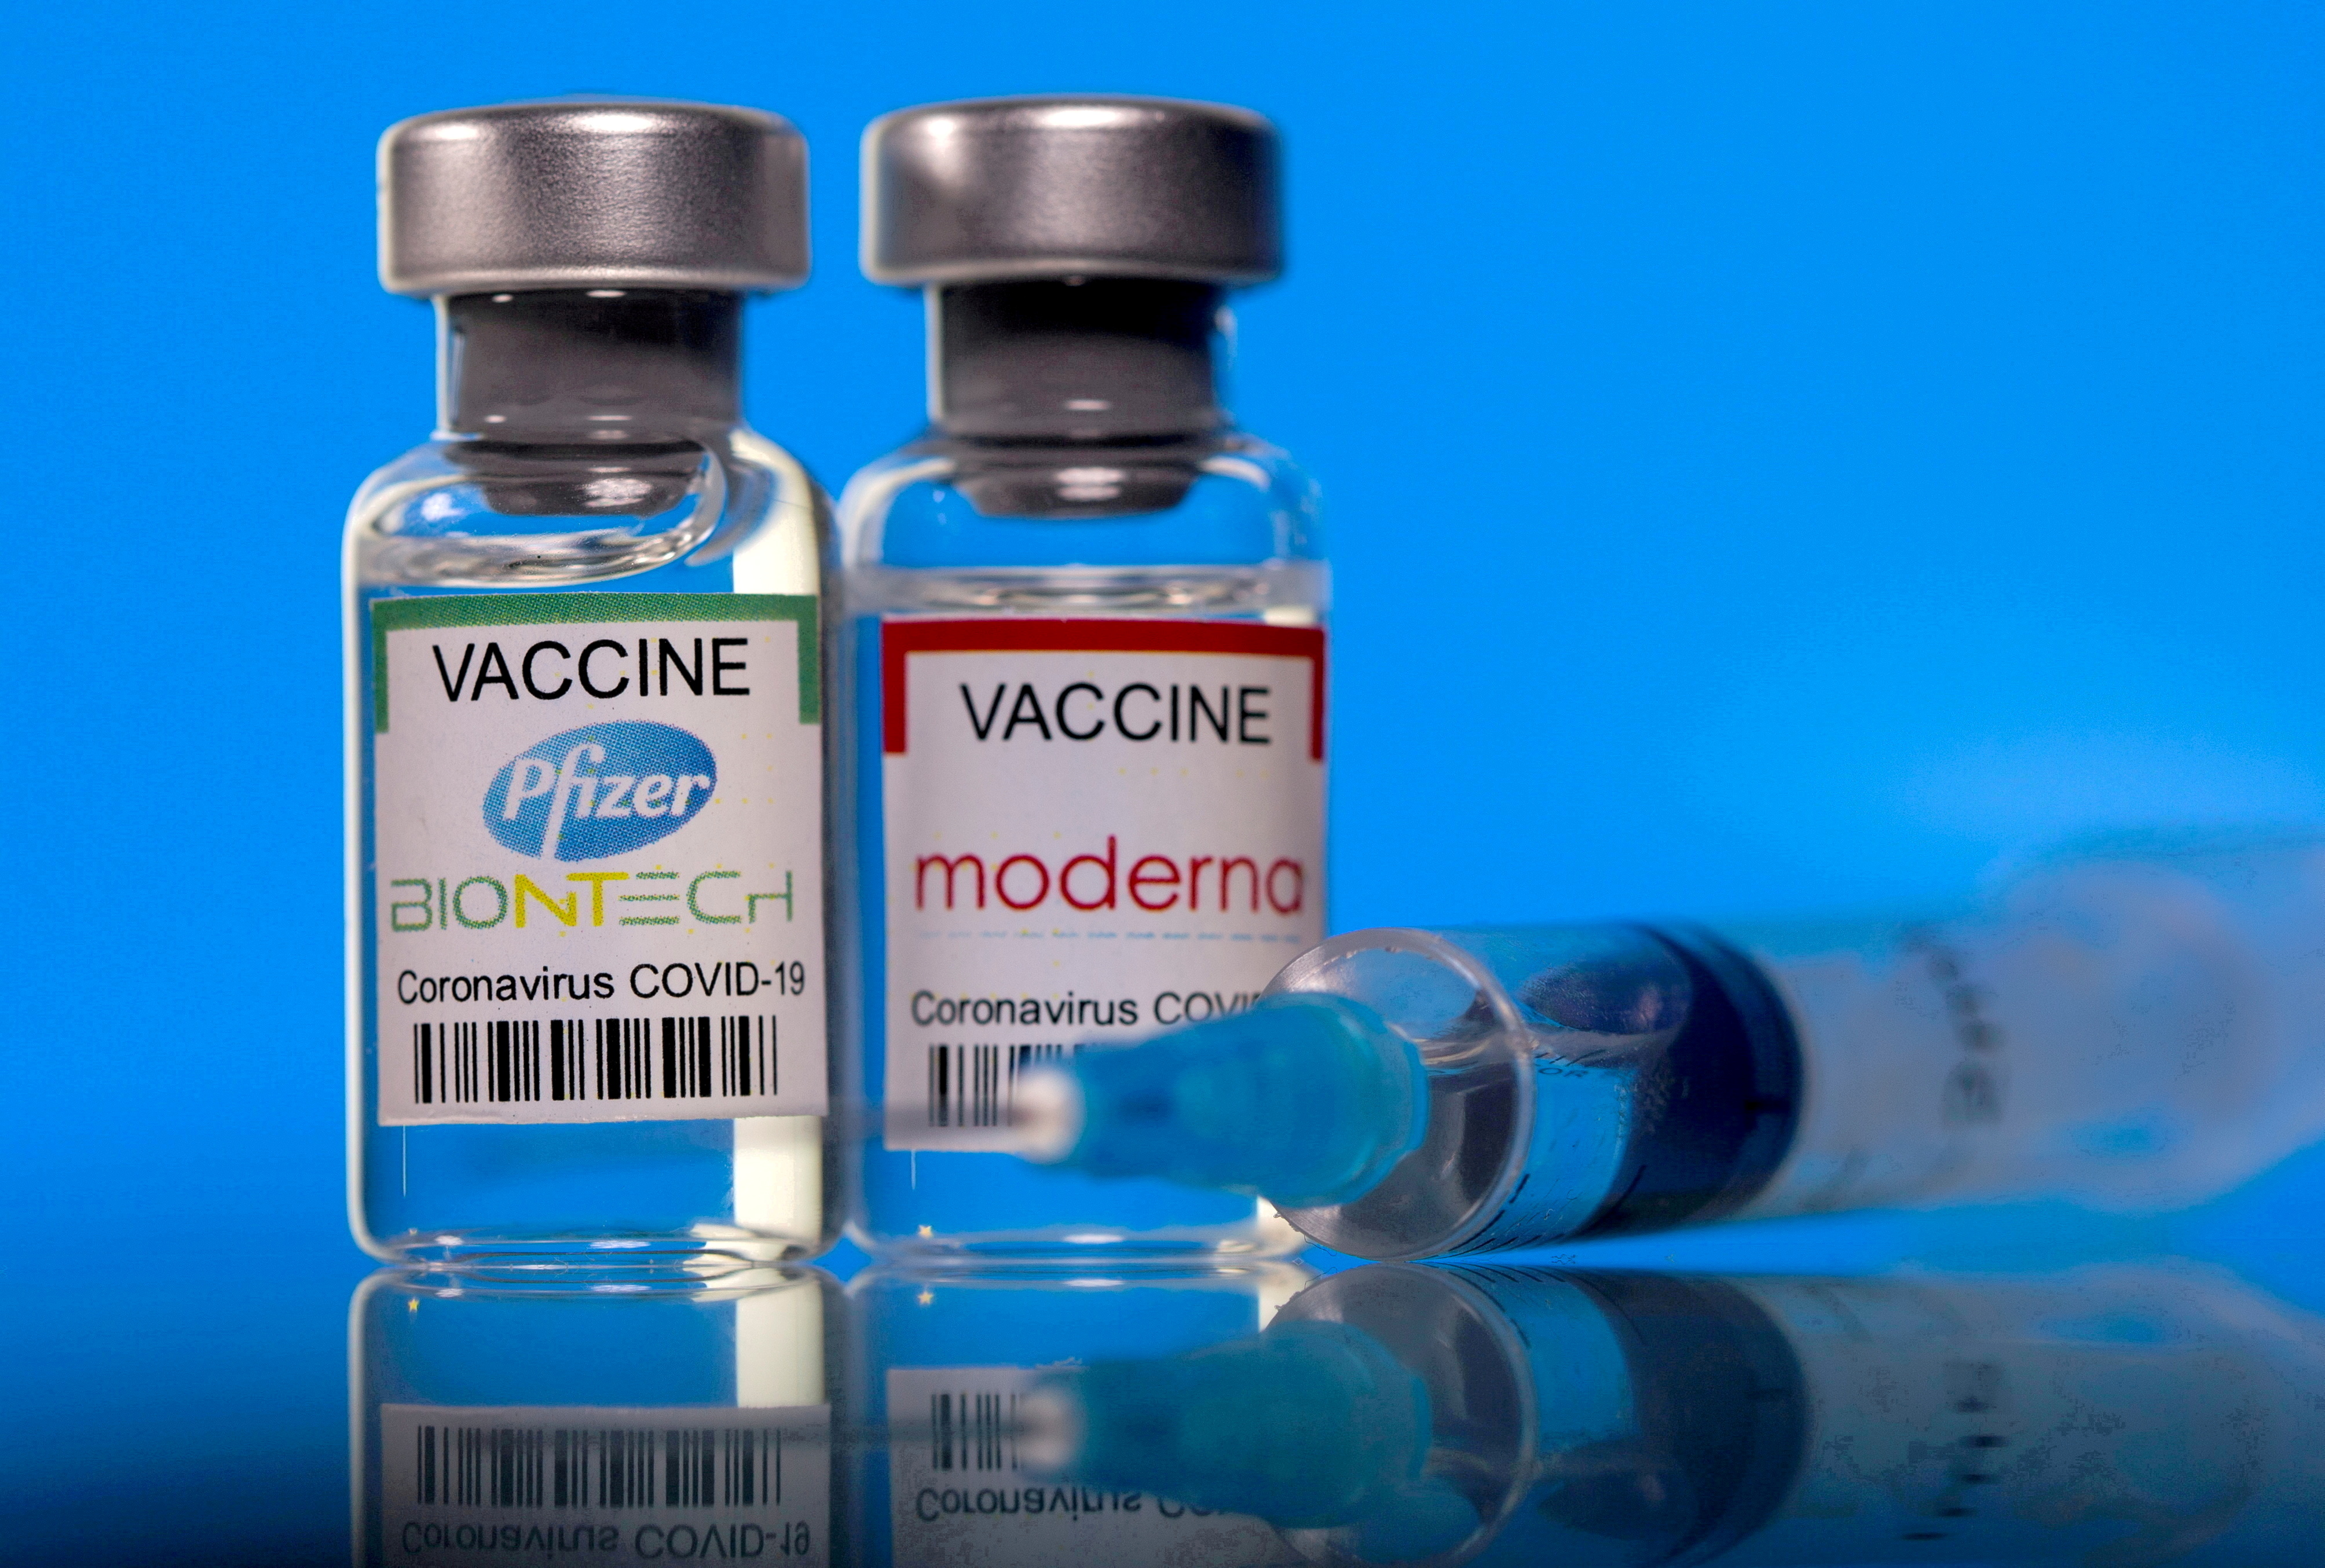 Picture illustration of vials with Pfizer-BioNTech and Moderna coronavirus disease (COVID-19) vaccine labels